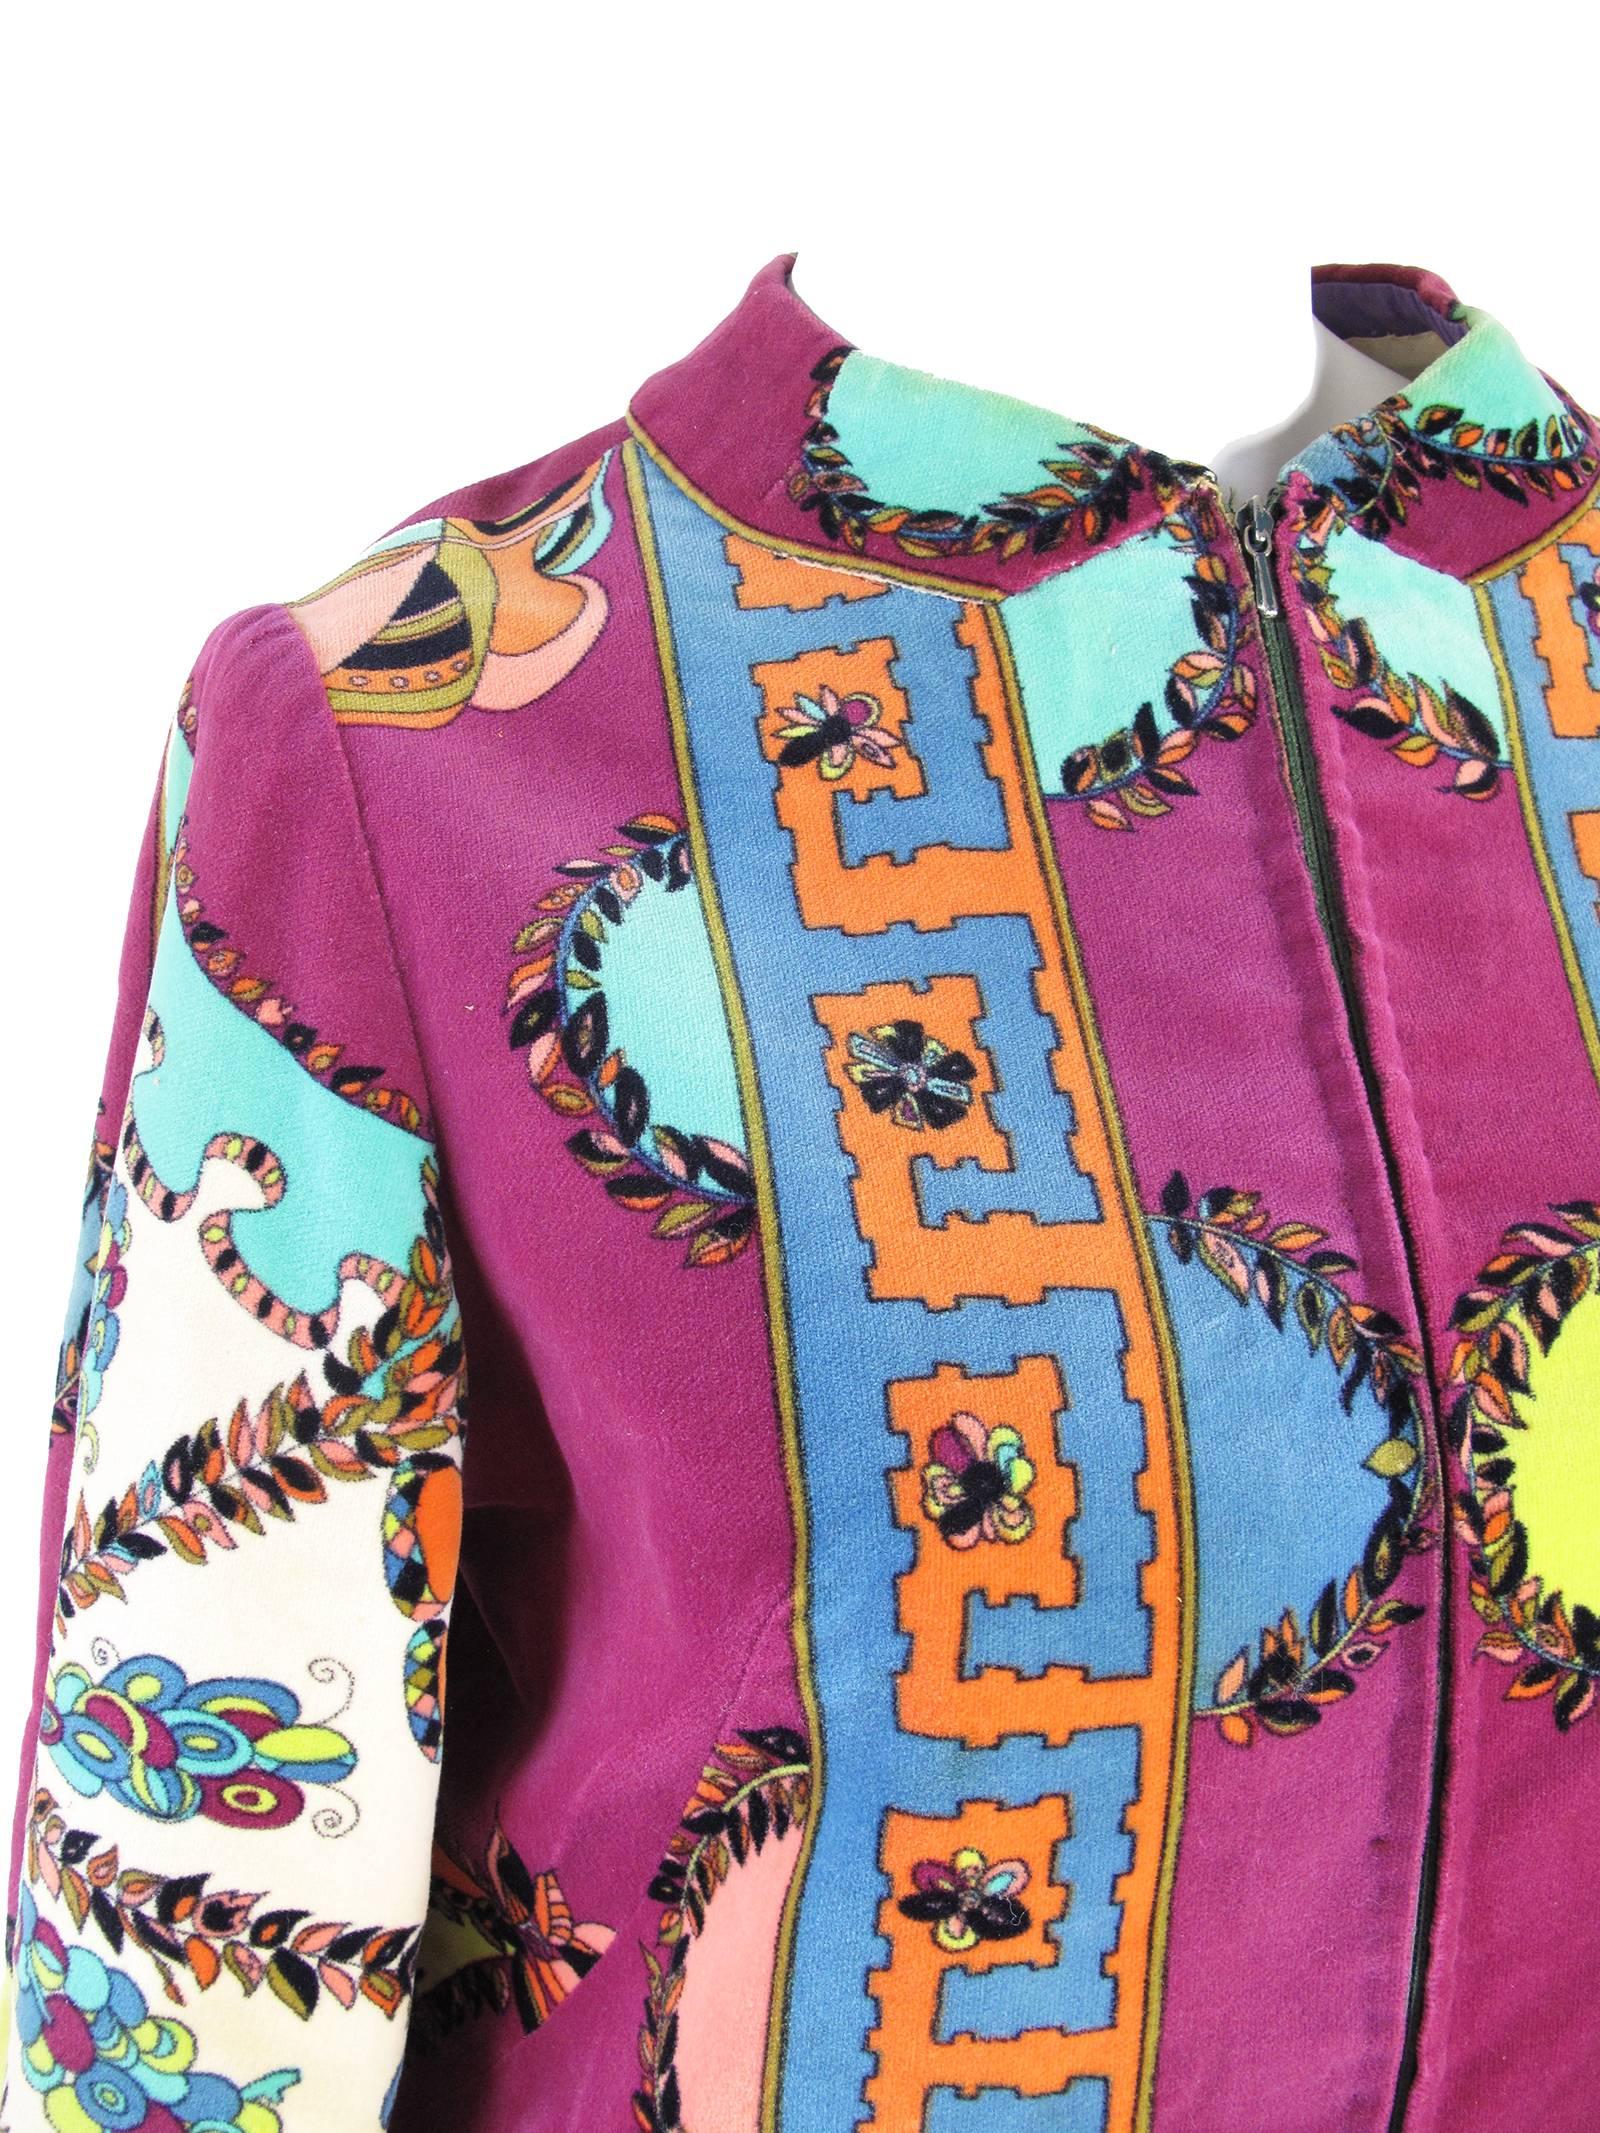 1960s Pucci velvet geometric print velvet jacket.  Zips up front. Condition: AS IS, a few spots on exterior, underarm staining on lining. Pucci size 8, current US size 4

We accept returns for refund, please see our terms. We offer free ground